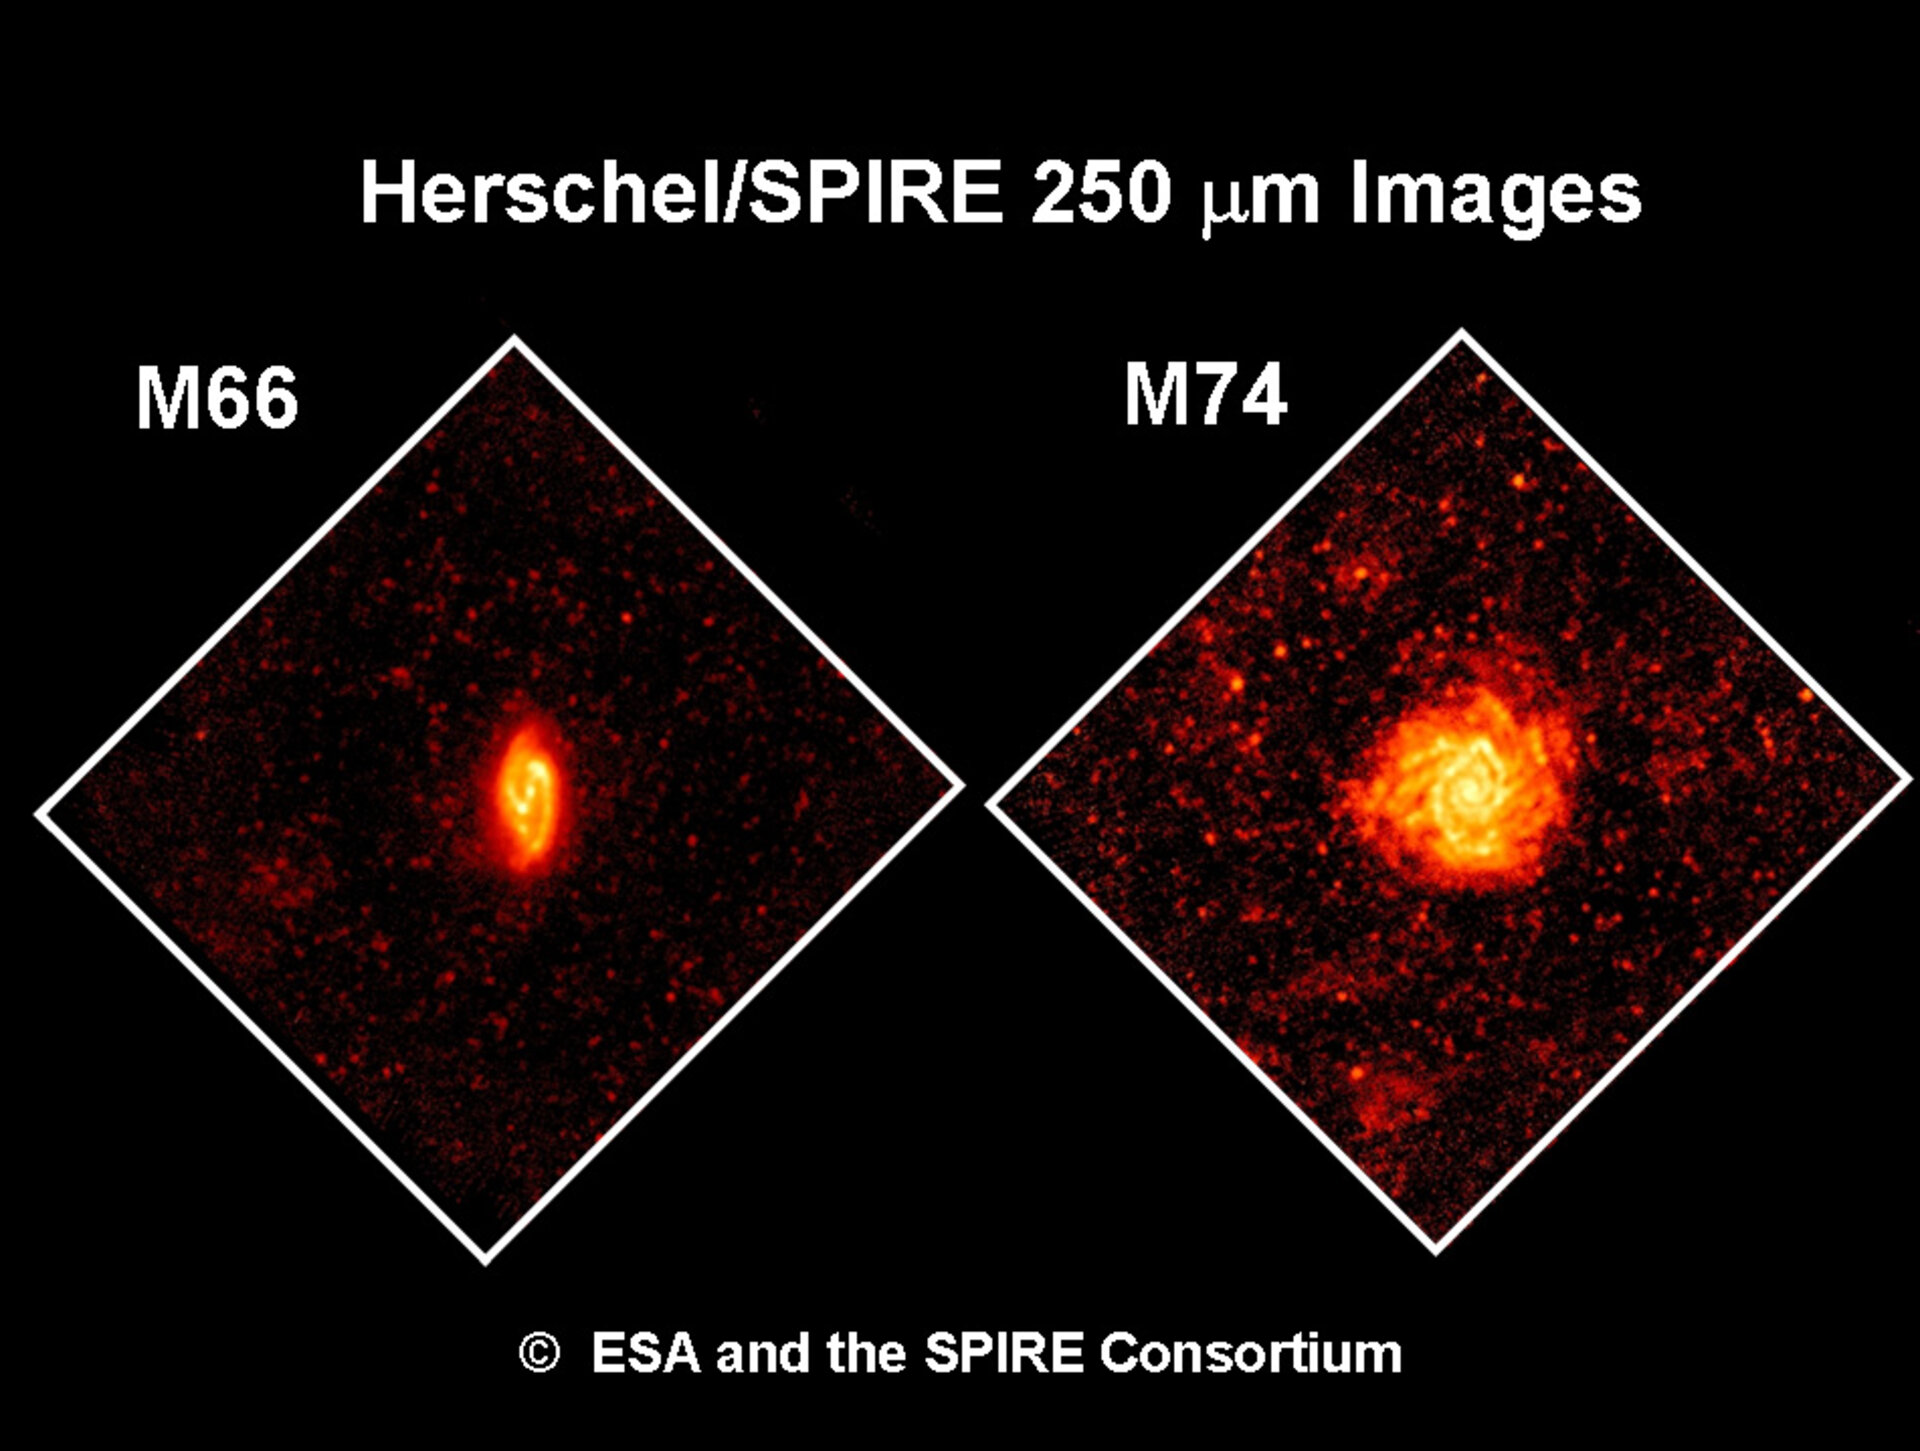 SPIRE images of M66 and M74